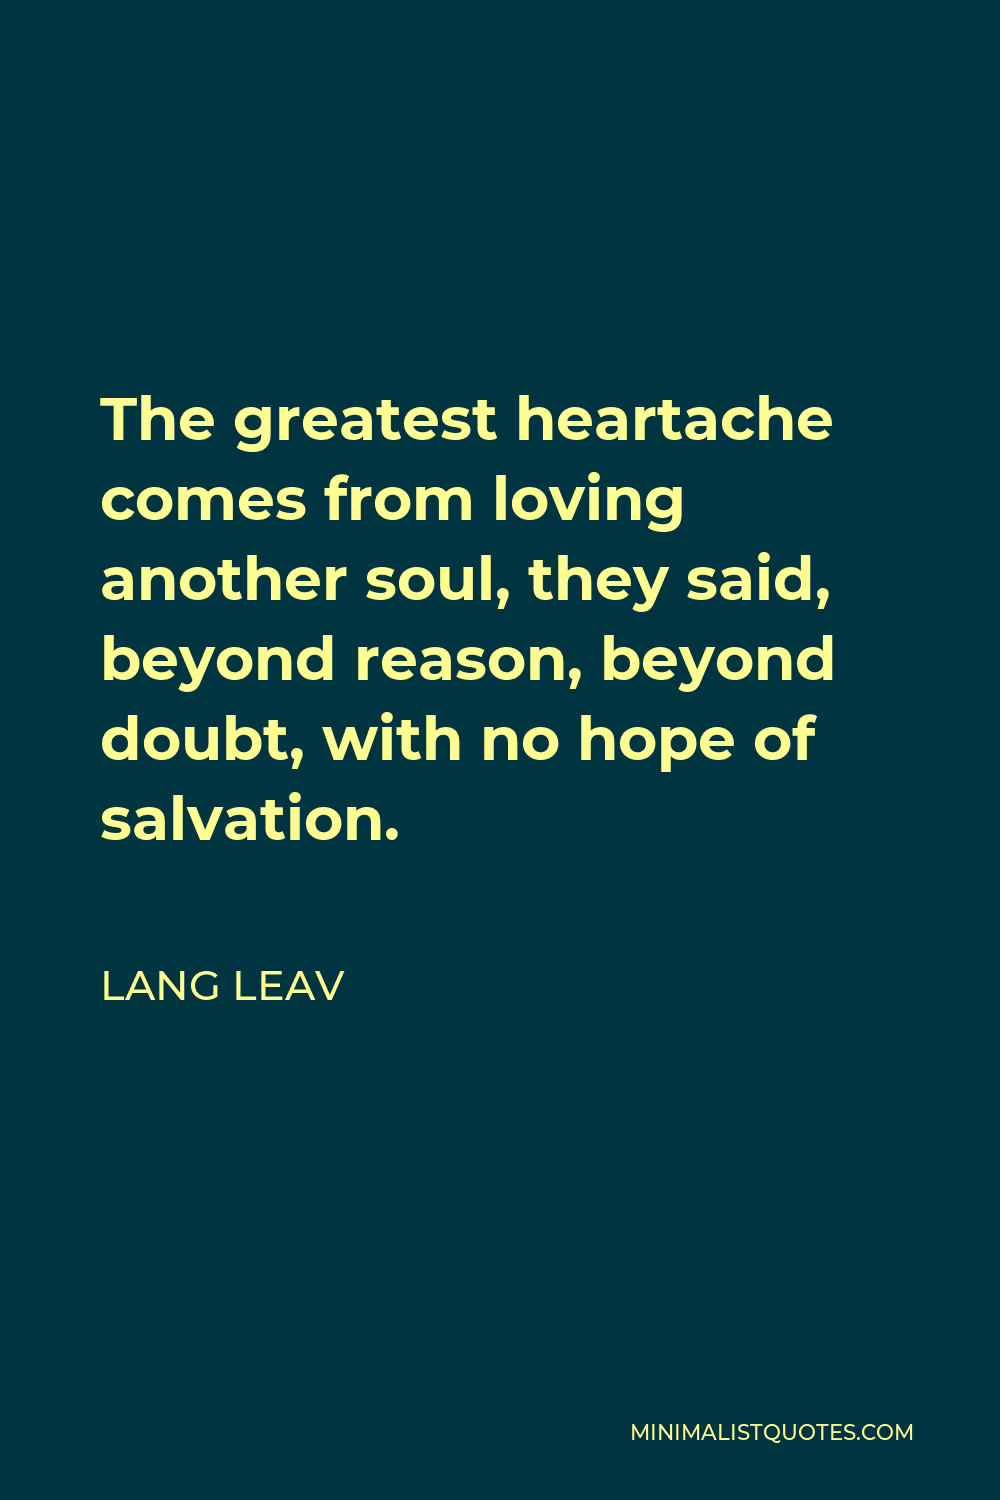 Lang Leav Quote - The greatest heartache comes from loving another soul, they said, beyond reason, beyond doubt, with no hope of salvation.